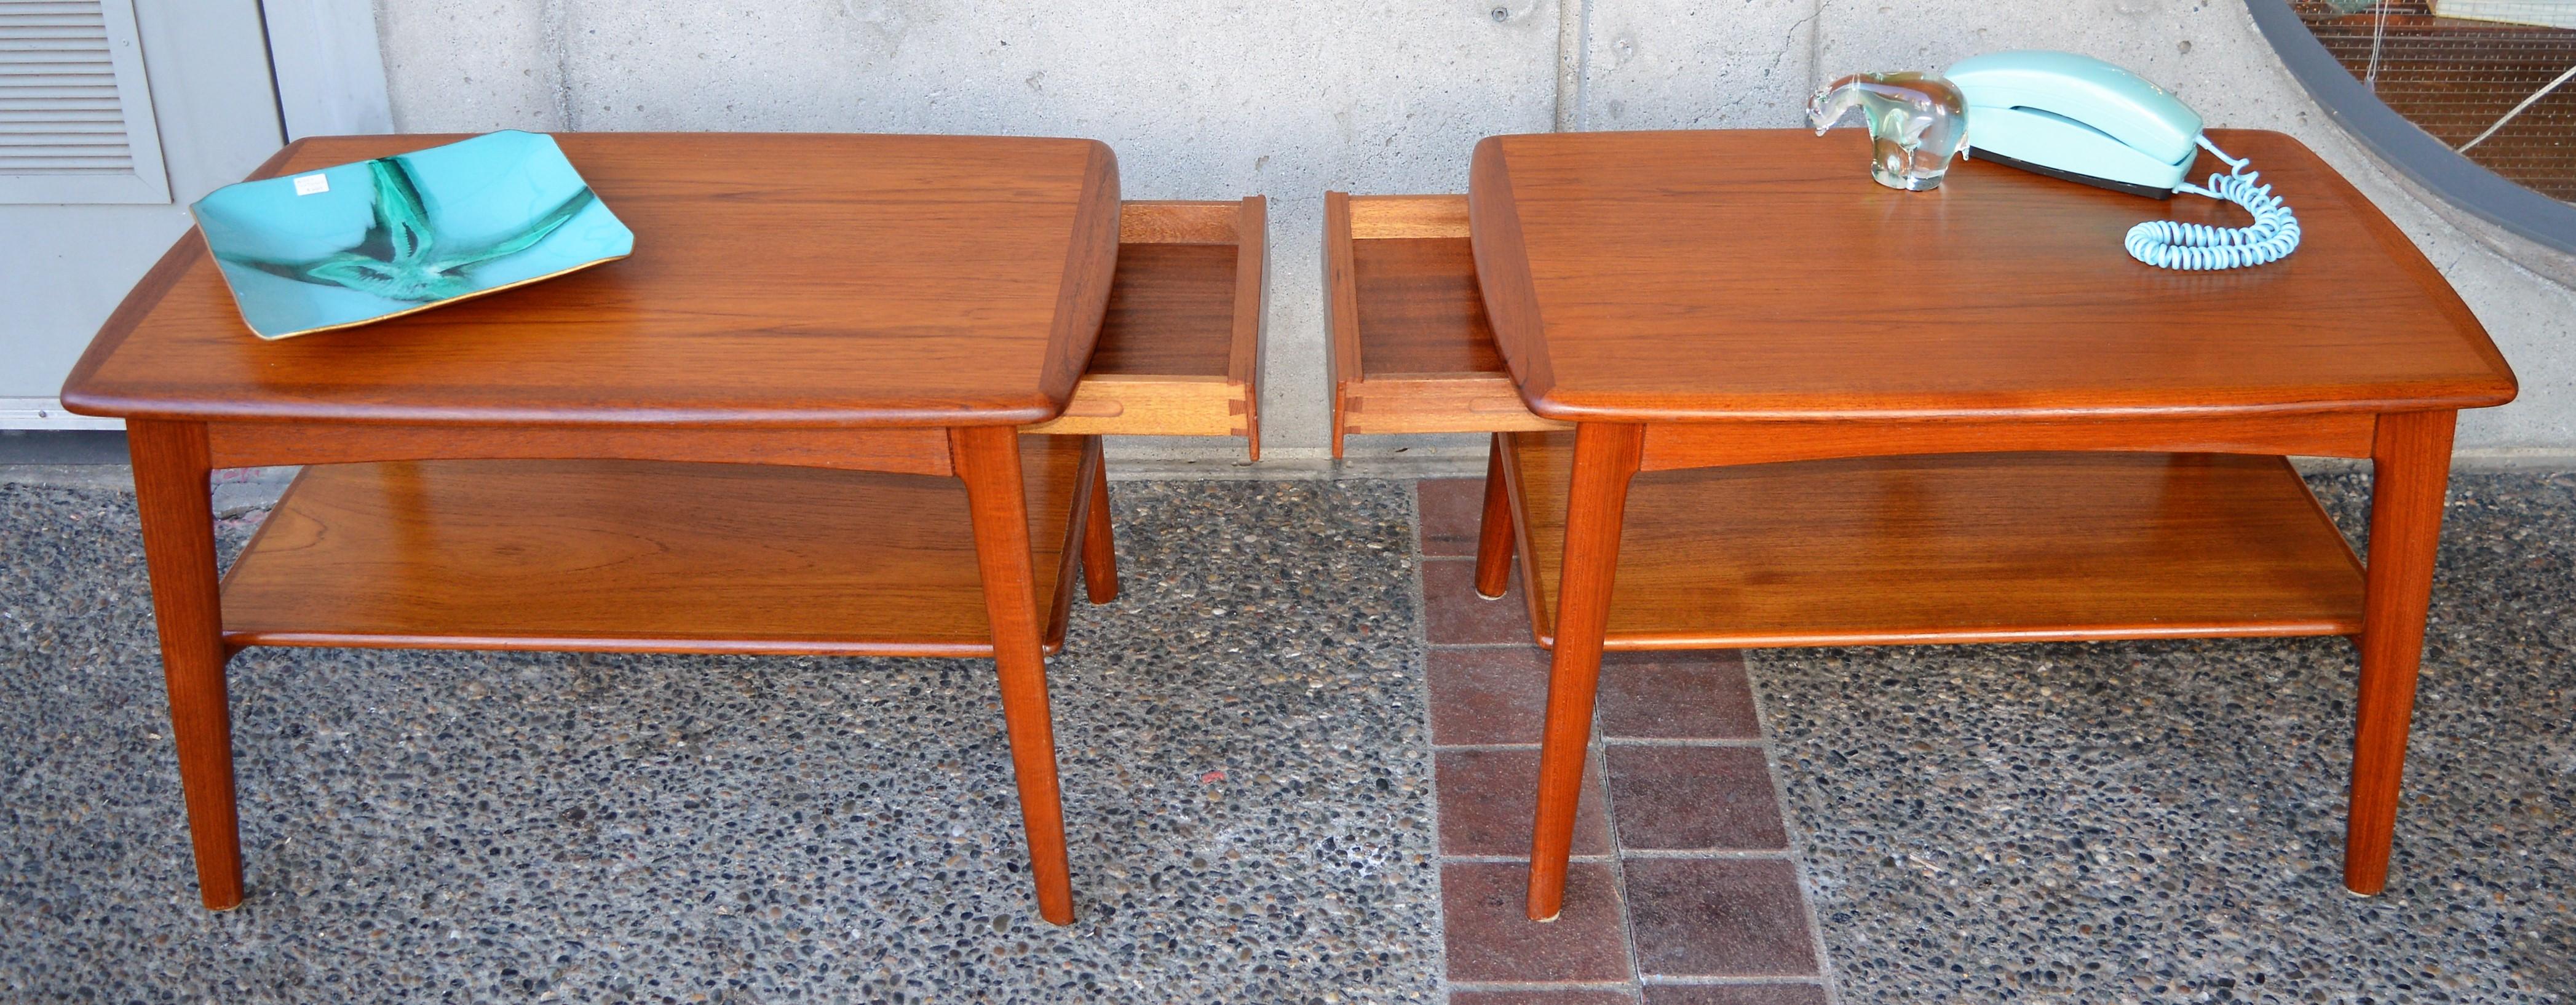 Mid-20th Century Pair of Quality Teak Side Tables or Nightstands by Svend Madsen W/Shelf & Drawer